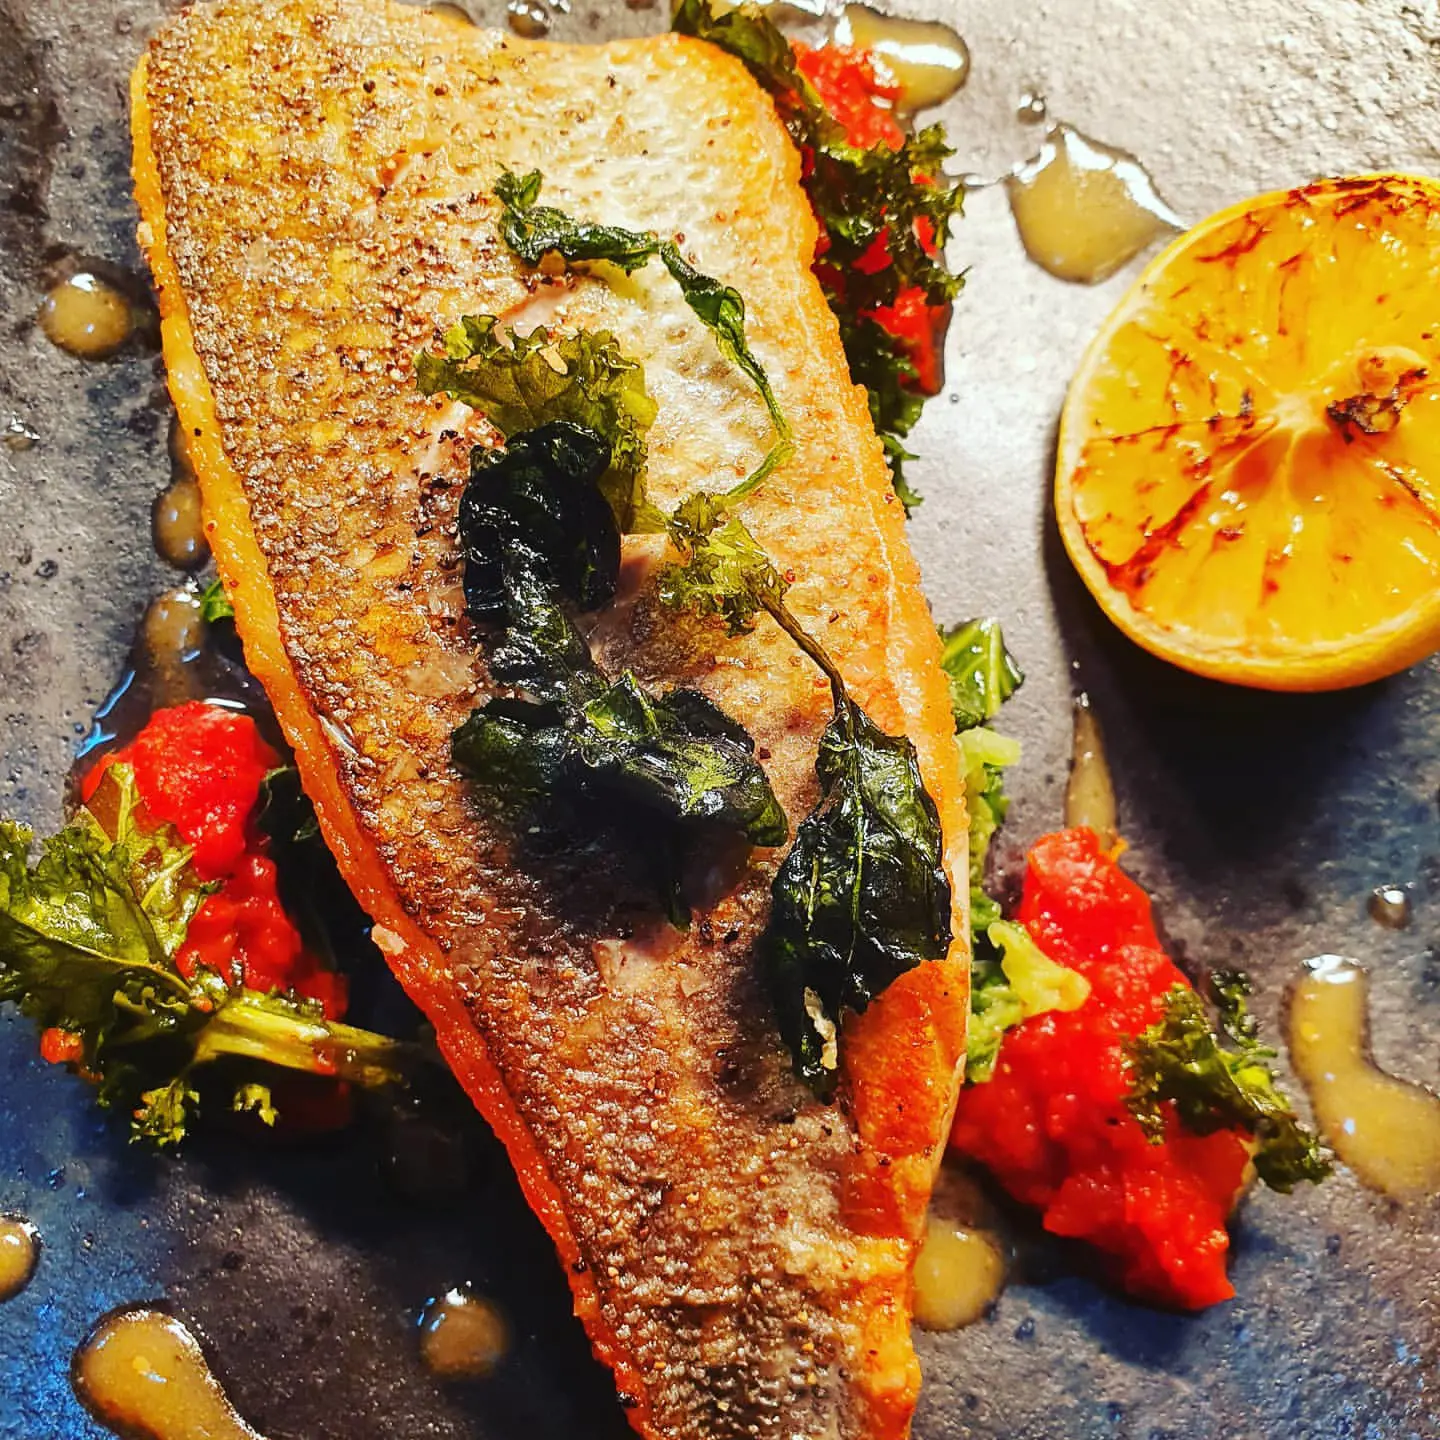 Grilled Seabass with a Tomato & Lemon relish.